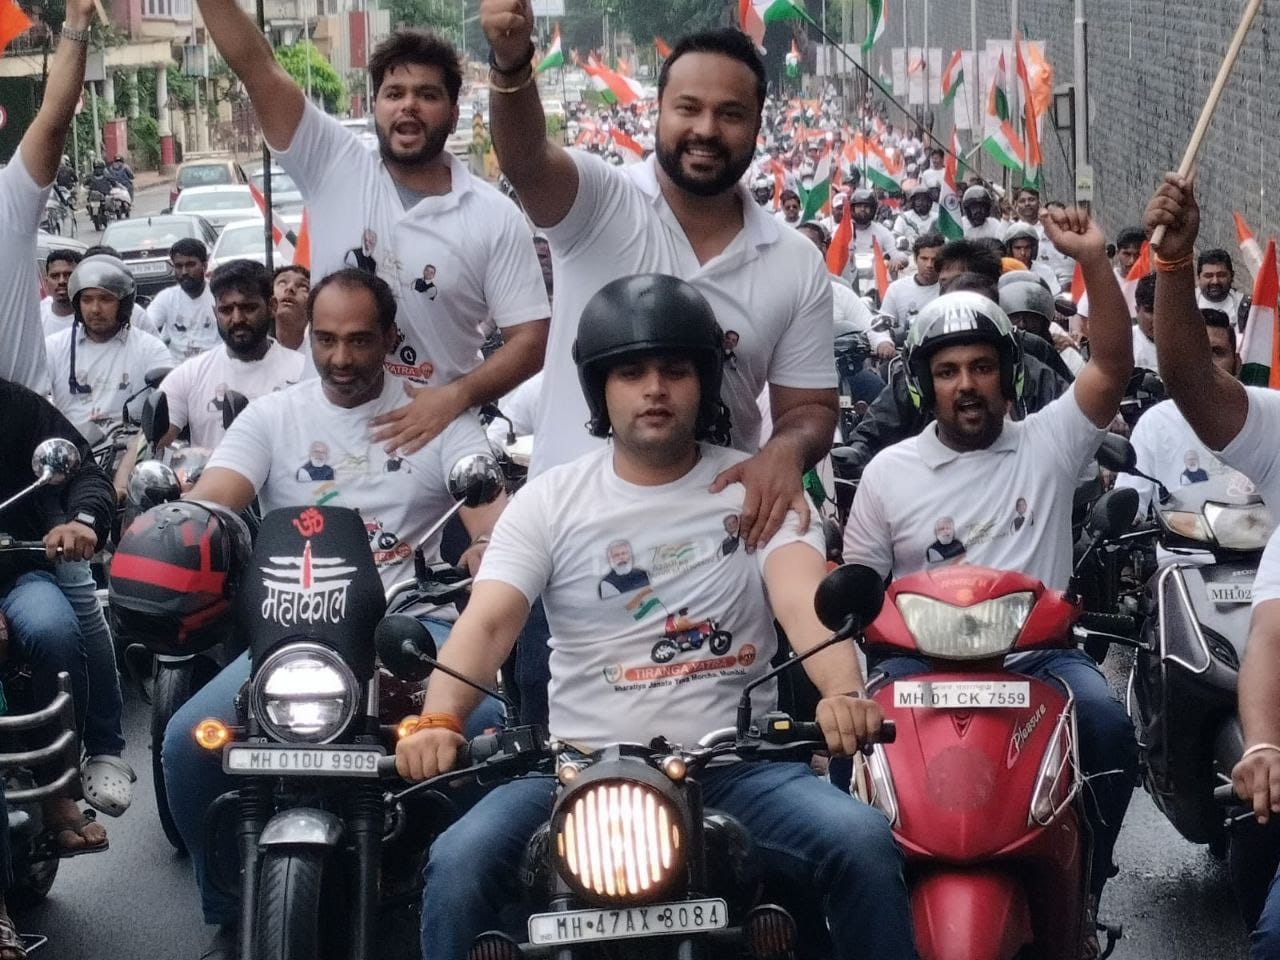 Tejinder Singh Tiwana celebrates Independence day by  hoisting the Indian flag on motorcycles